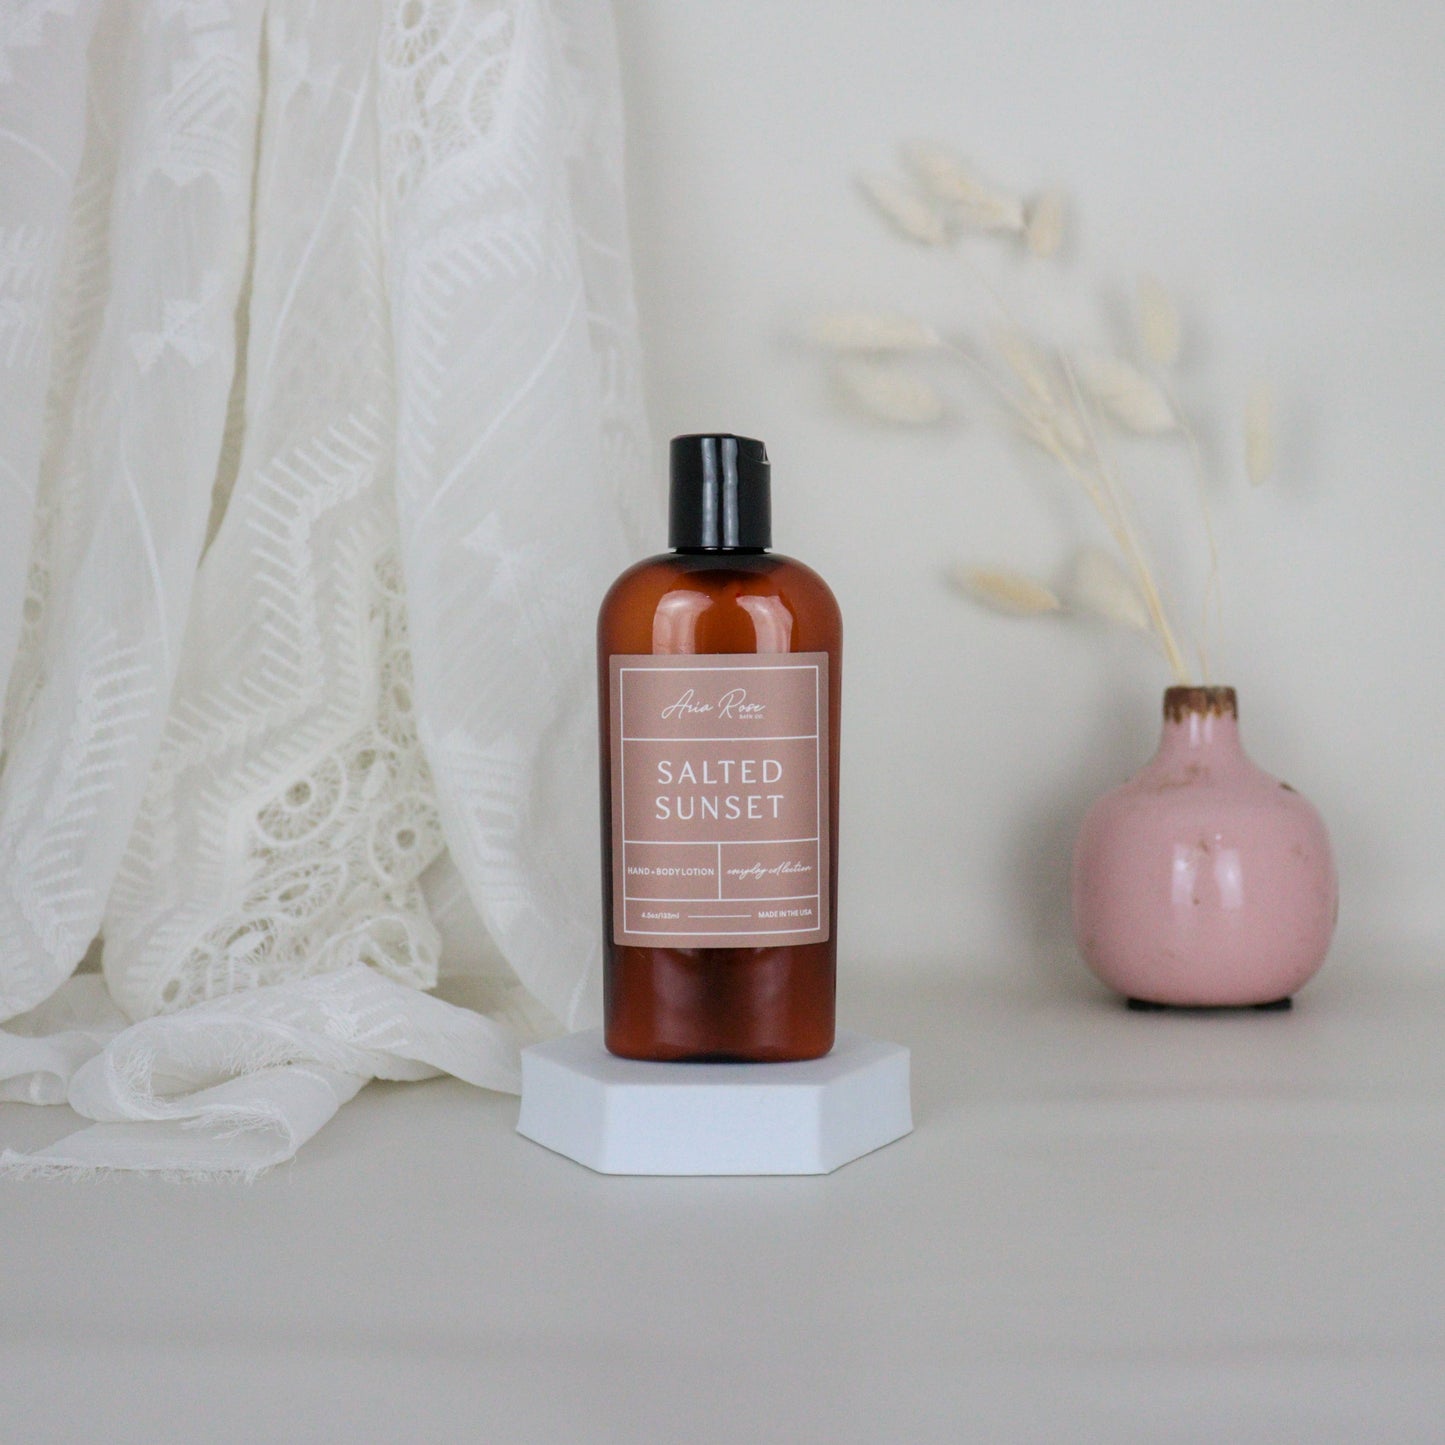 Aria Rose Bath Co - Salted Sunset Hand + Body Lotion